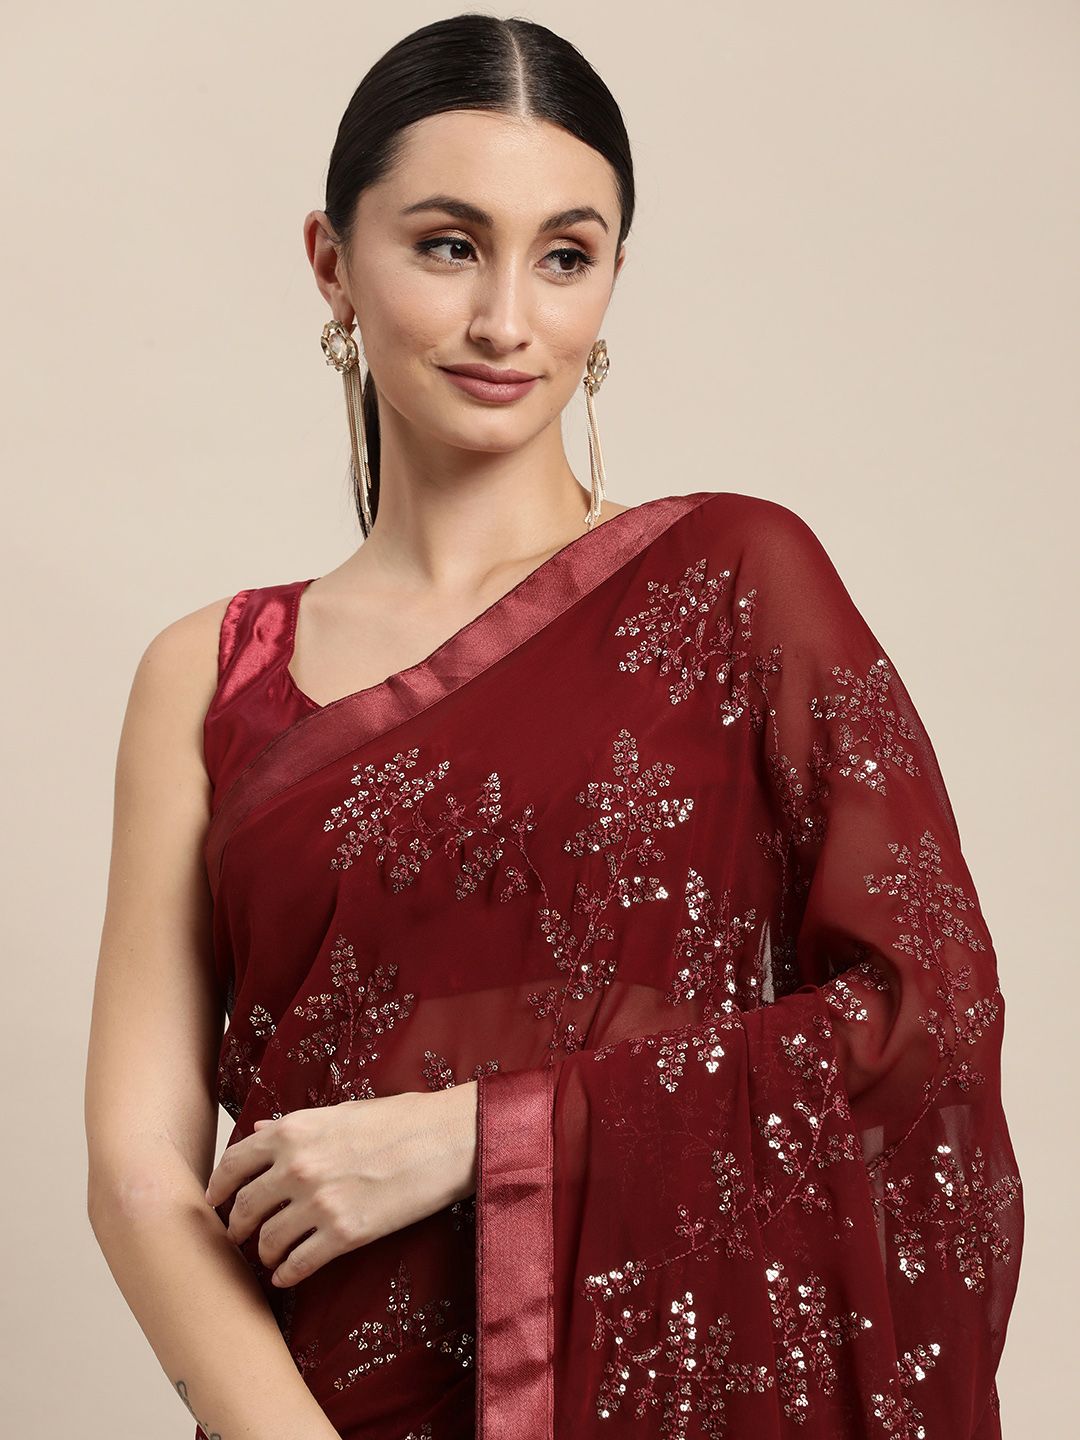 VAIRAGEE Maroon Floral Embroidered Saree Price in India